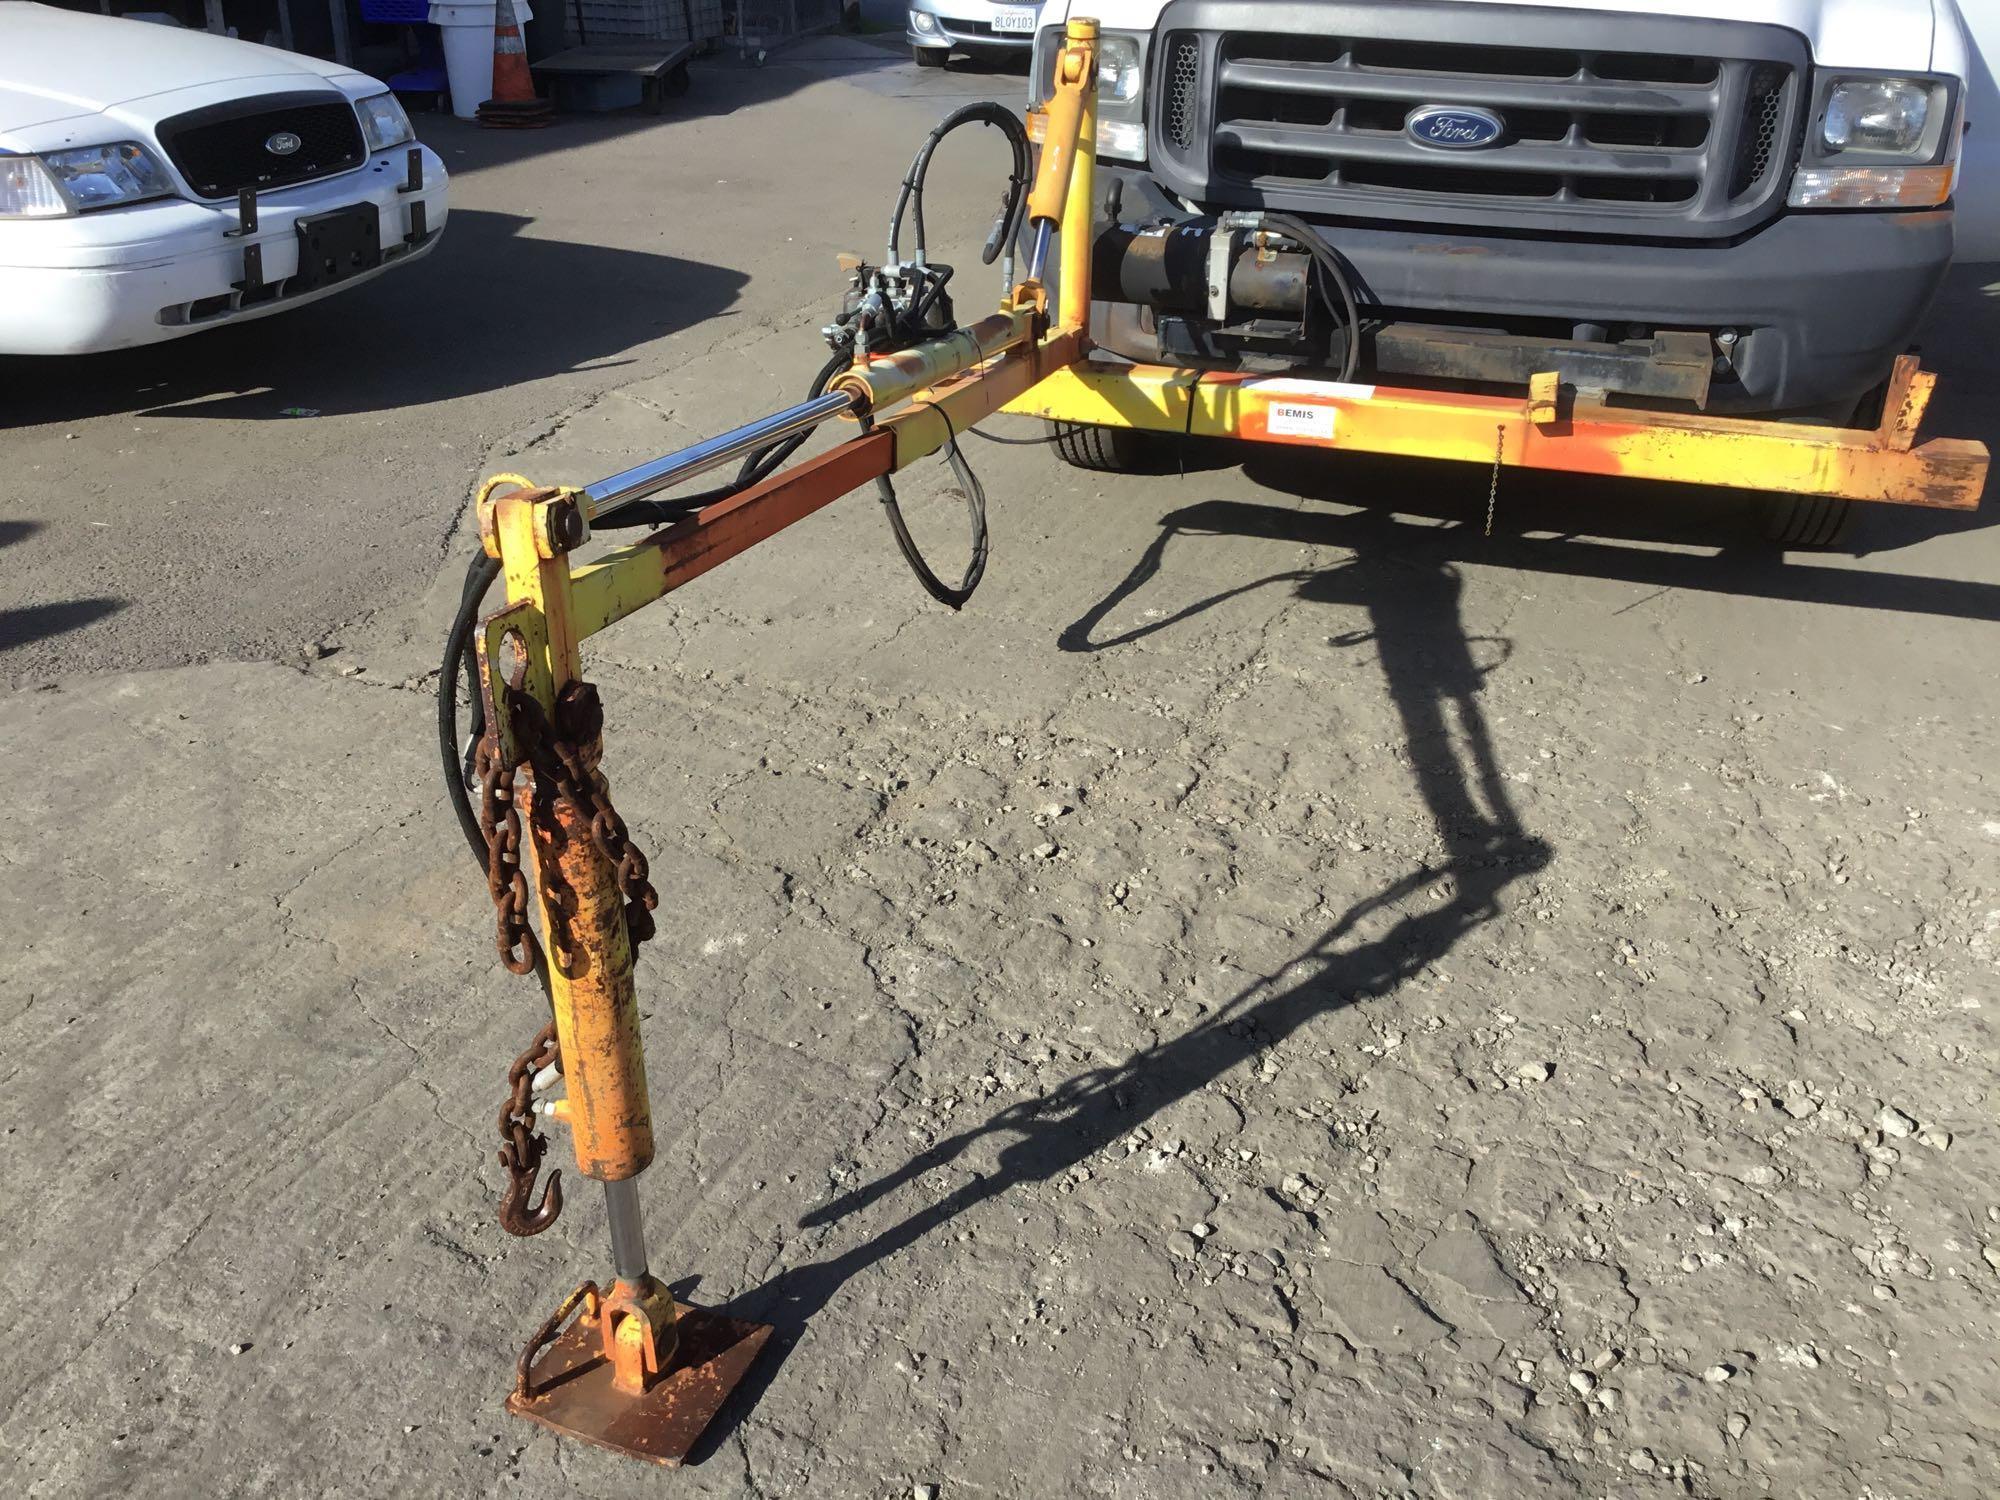 2003 Ford F-450 XL Crew Cab with KNAPHEIDE Service Body and BEMIS Post Puller